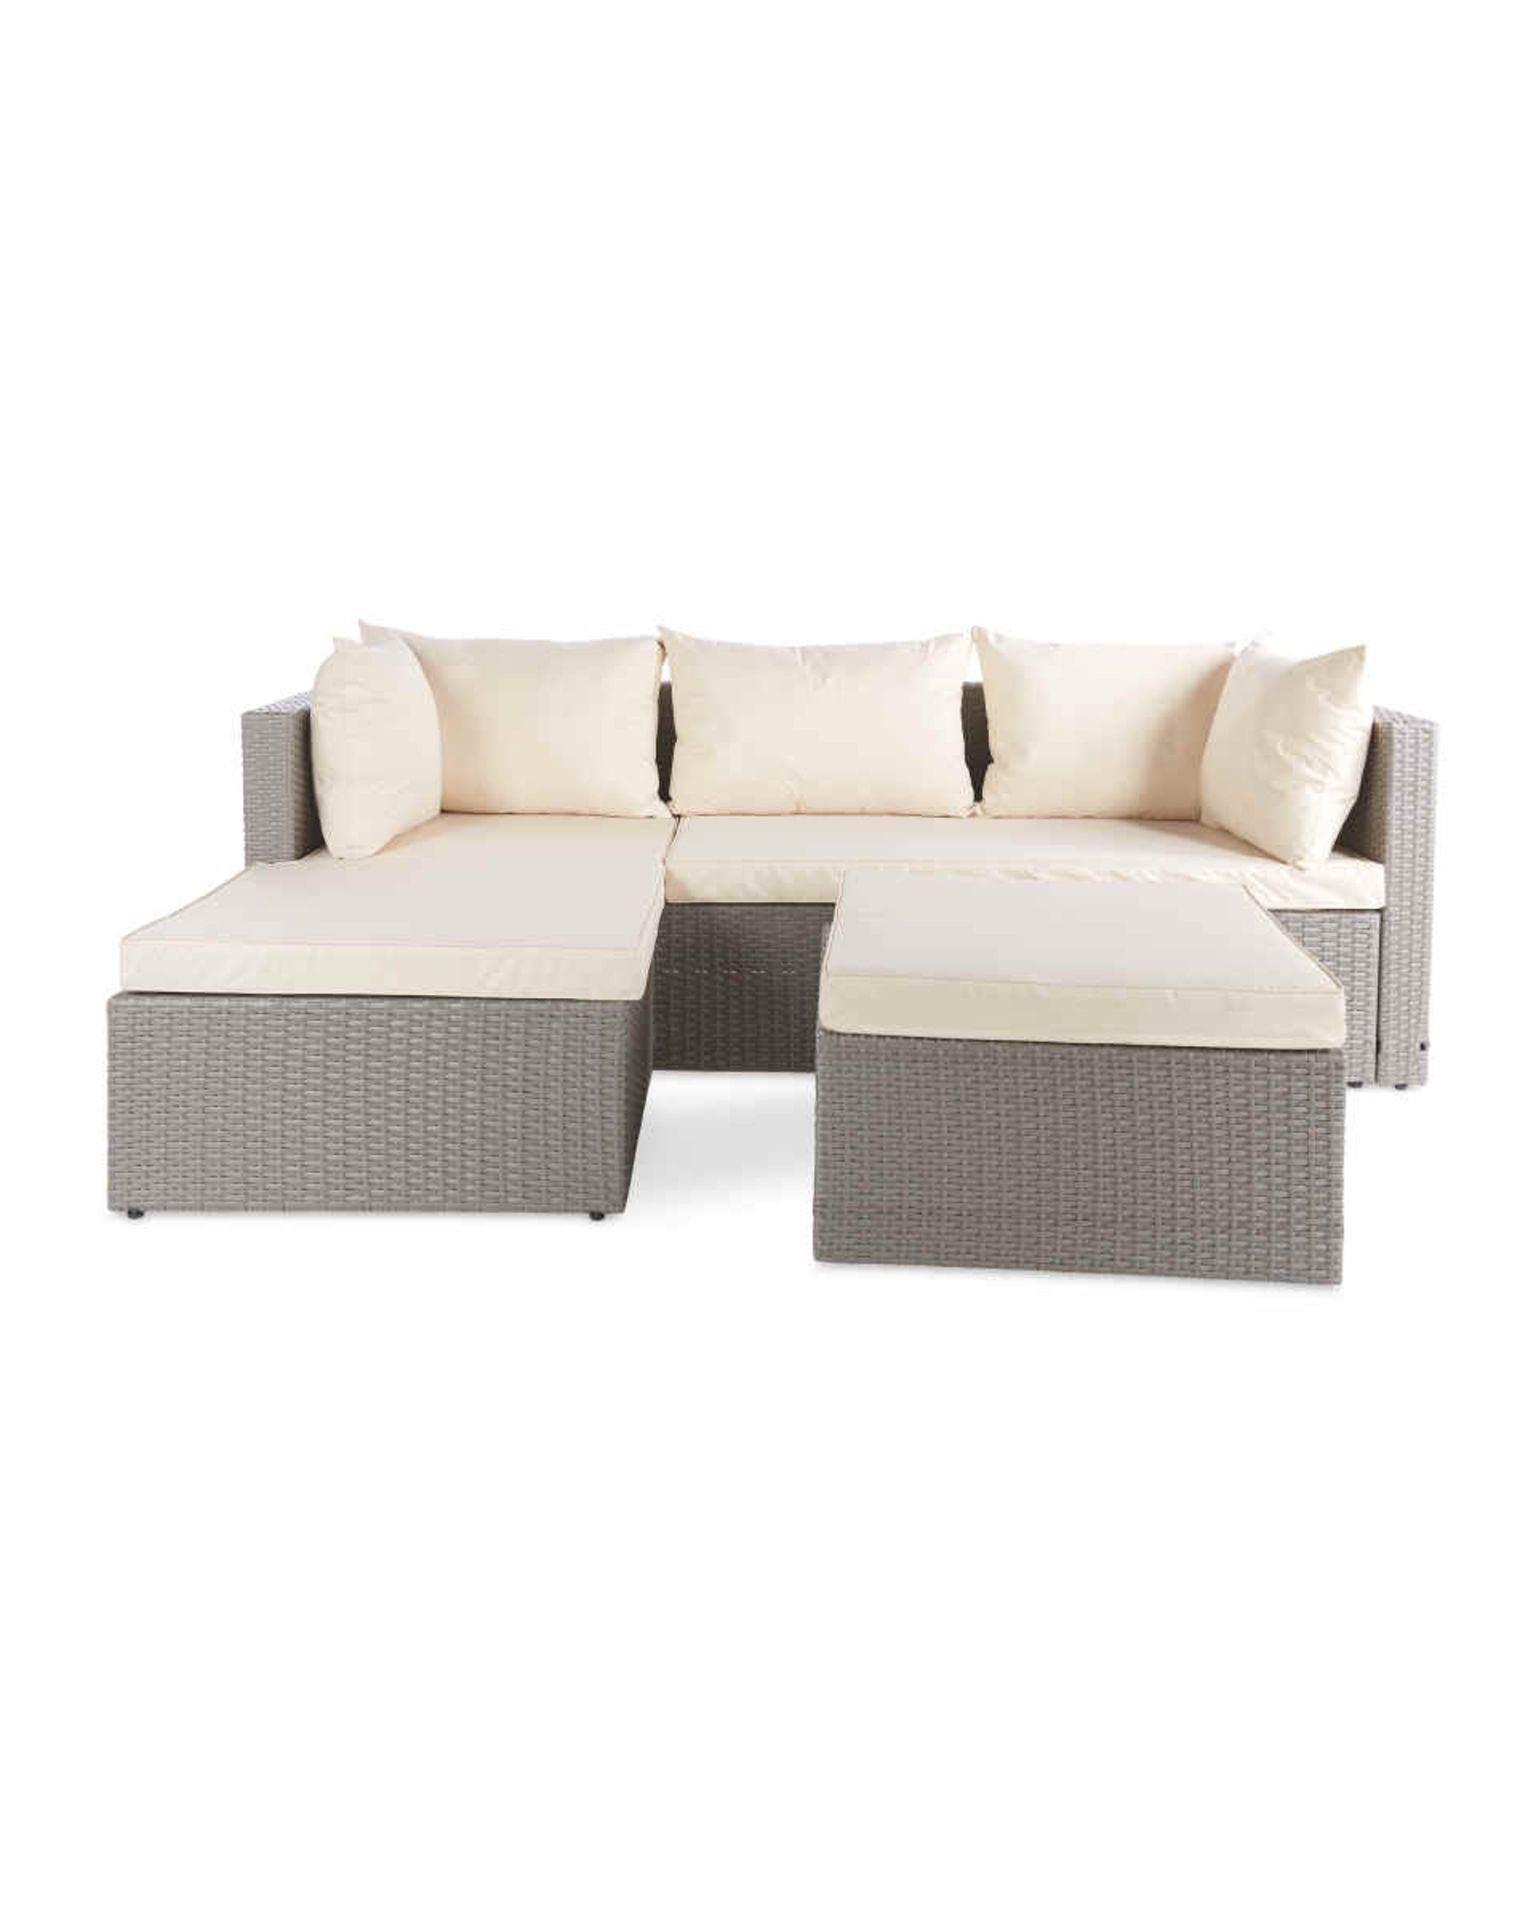 (2099212) Anthracite Rattan Sofa With Cover - Image 2 of 2